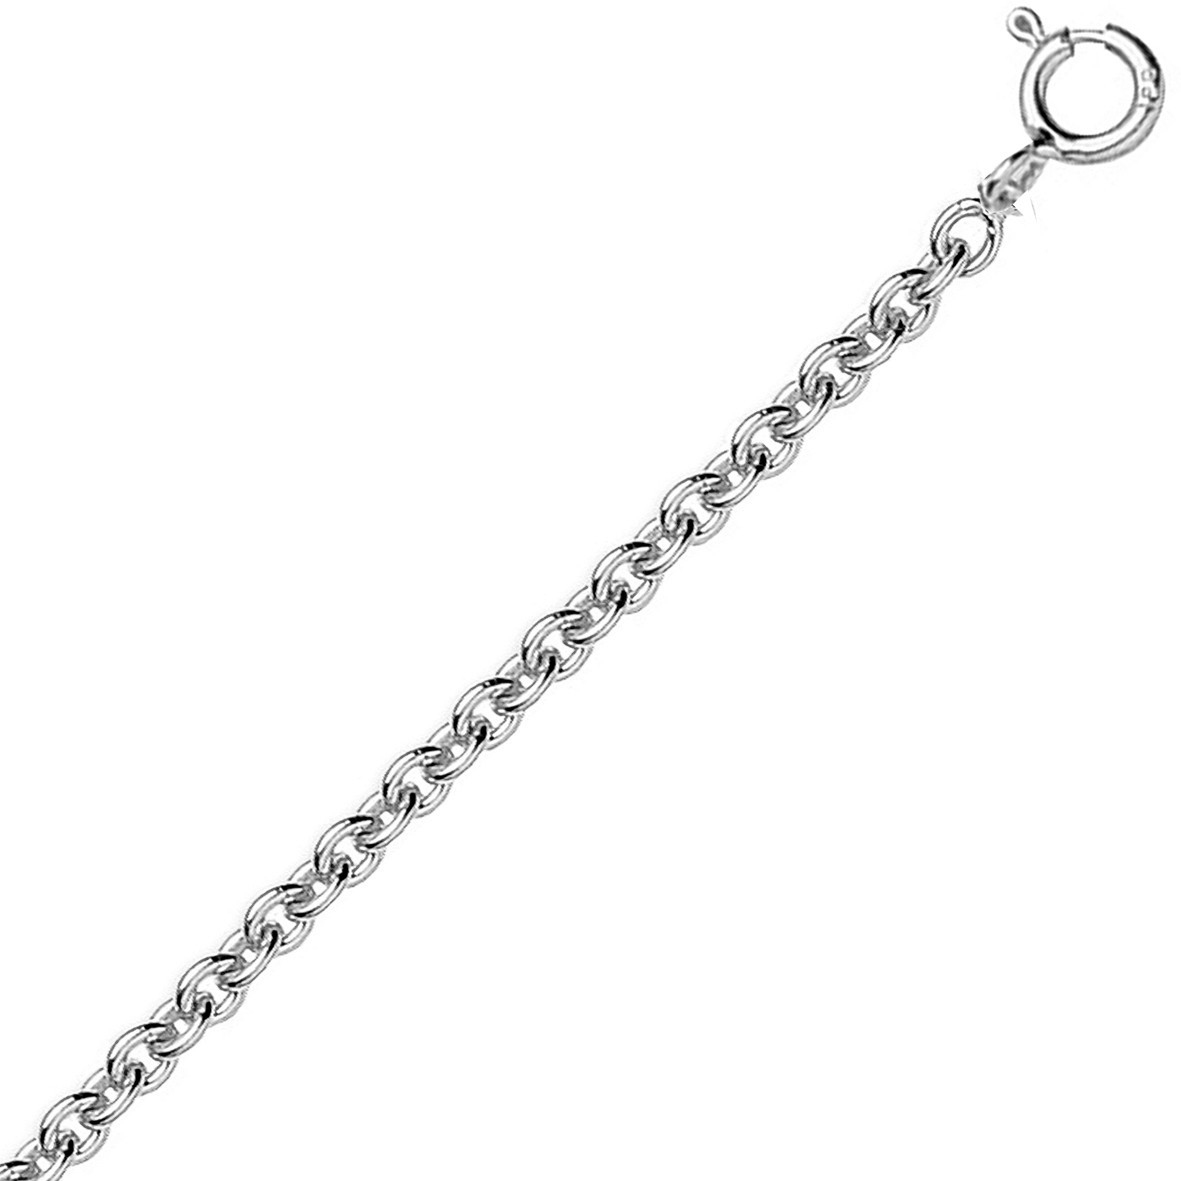 Chaine or blanc 18k maille forçat ronde 1,10mm